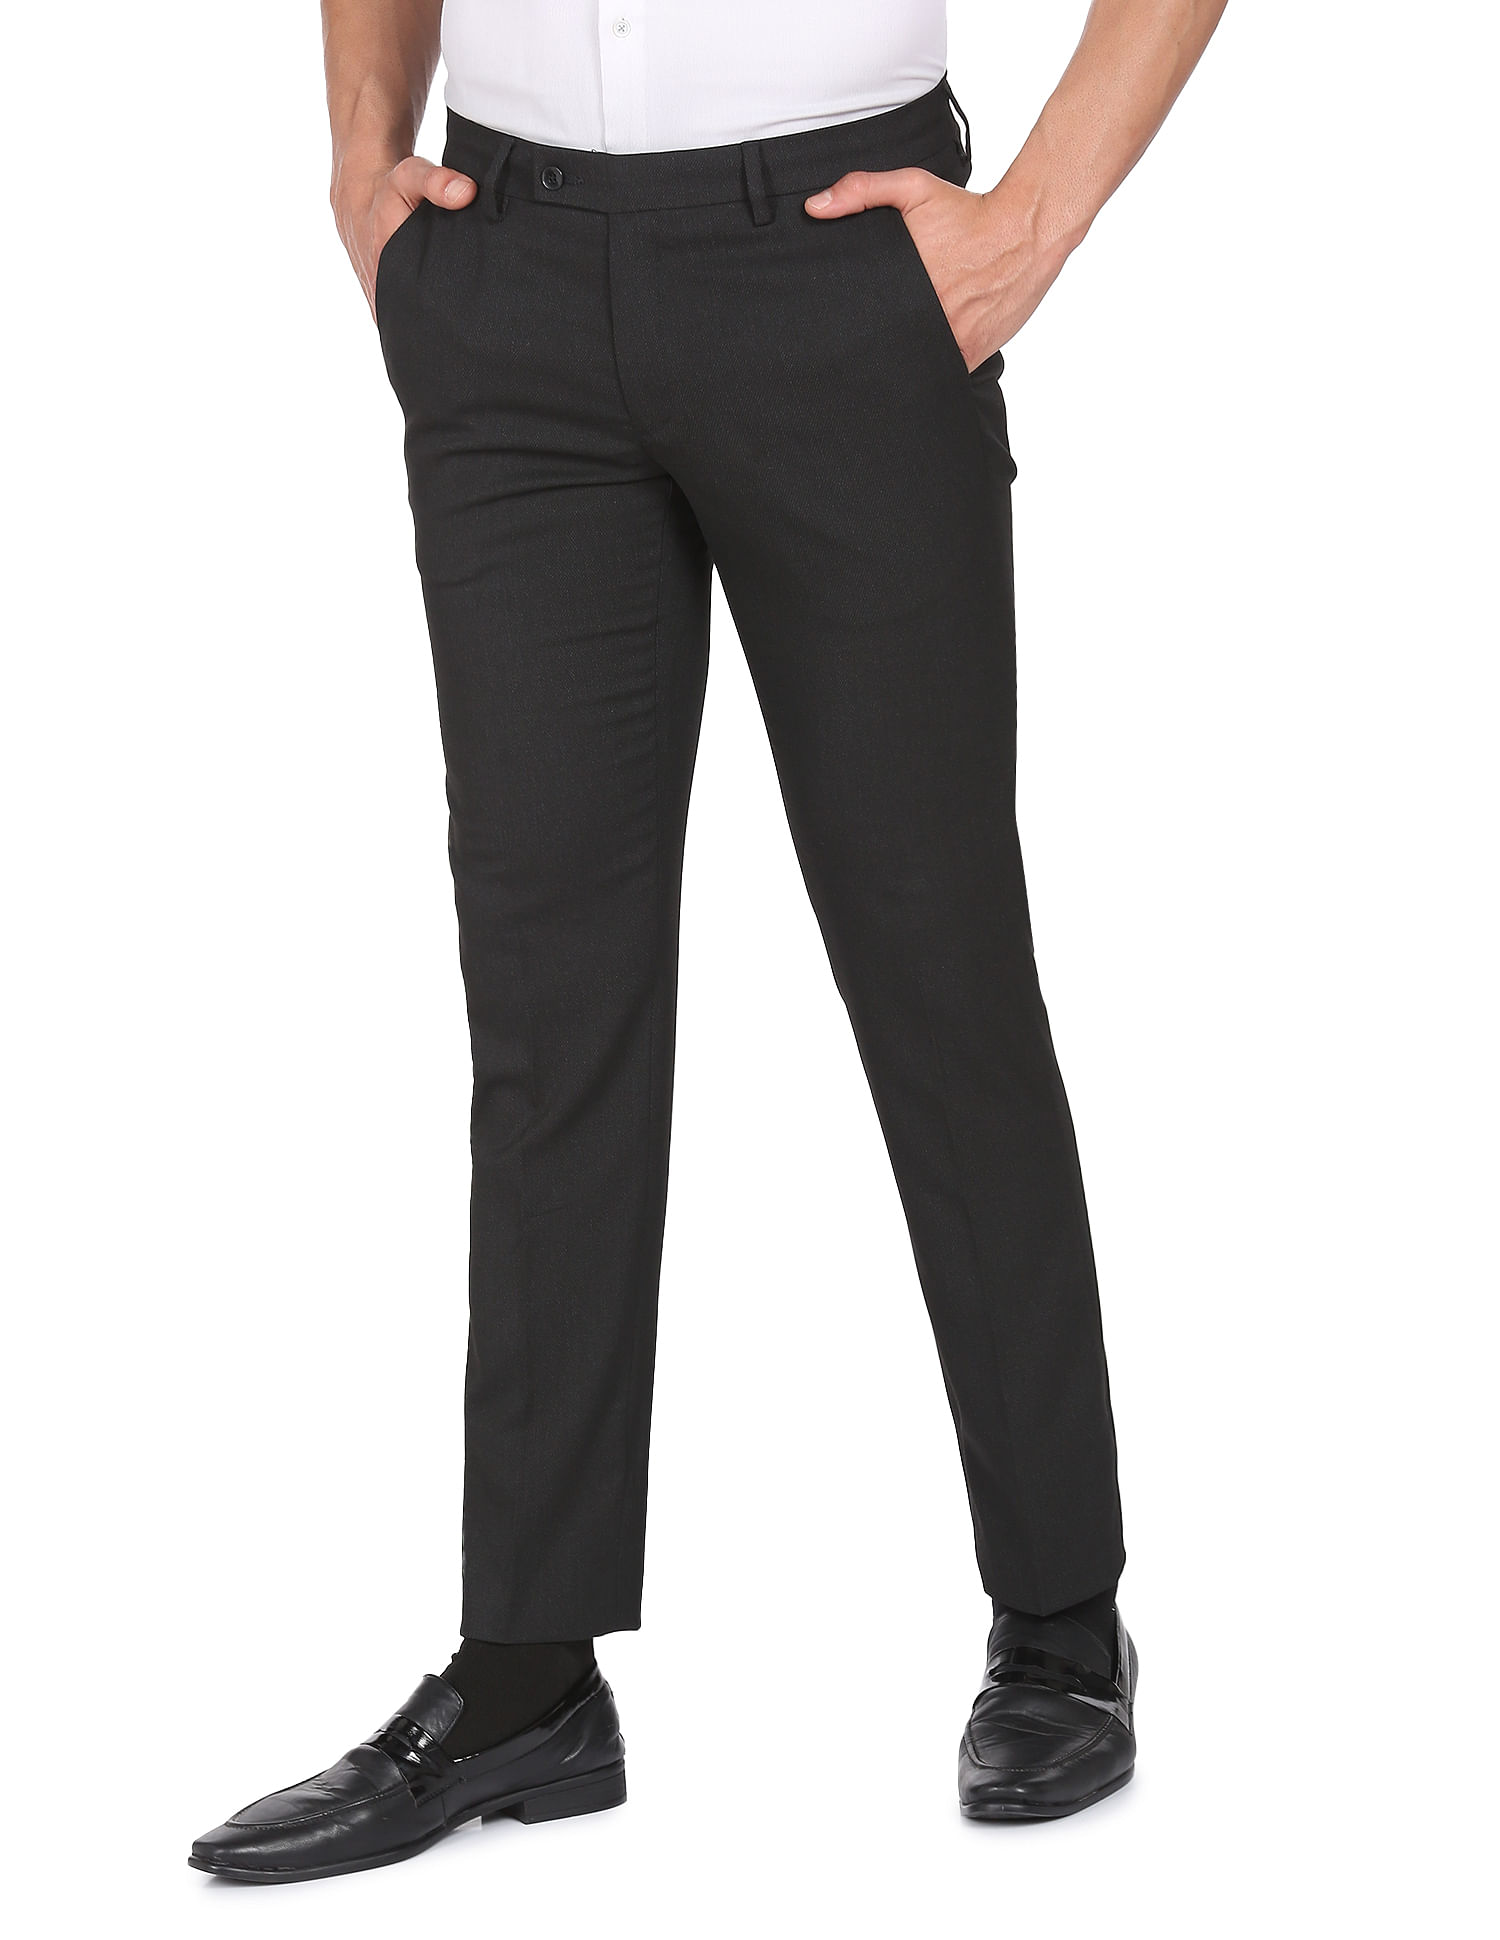 Cavalry Polyster viscose Blend Formal Trousers For Man |formal pants black|black  pant | trousers for men | official pant |